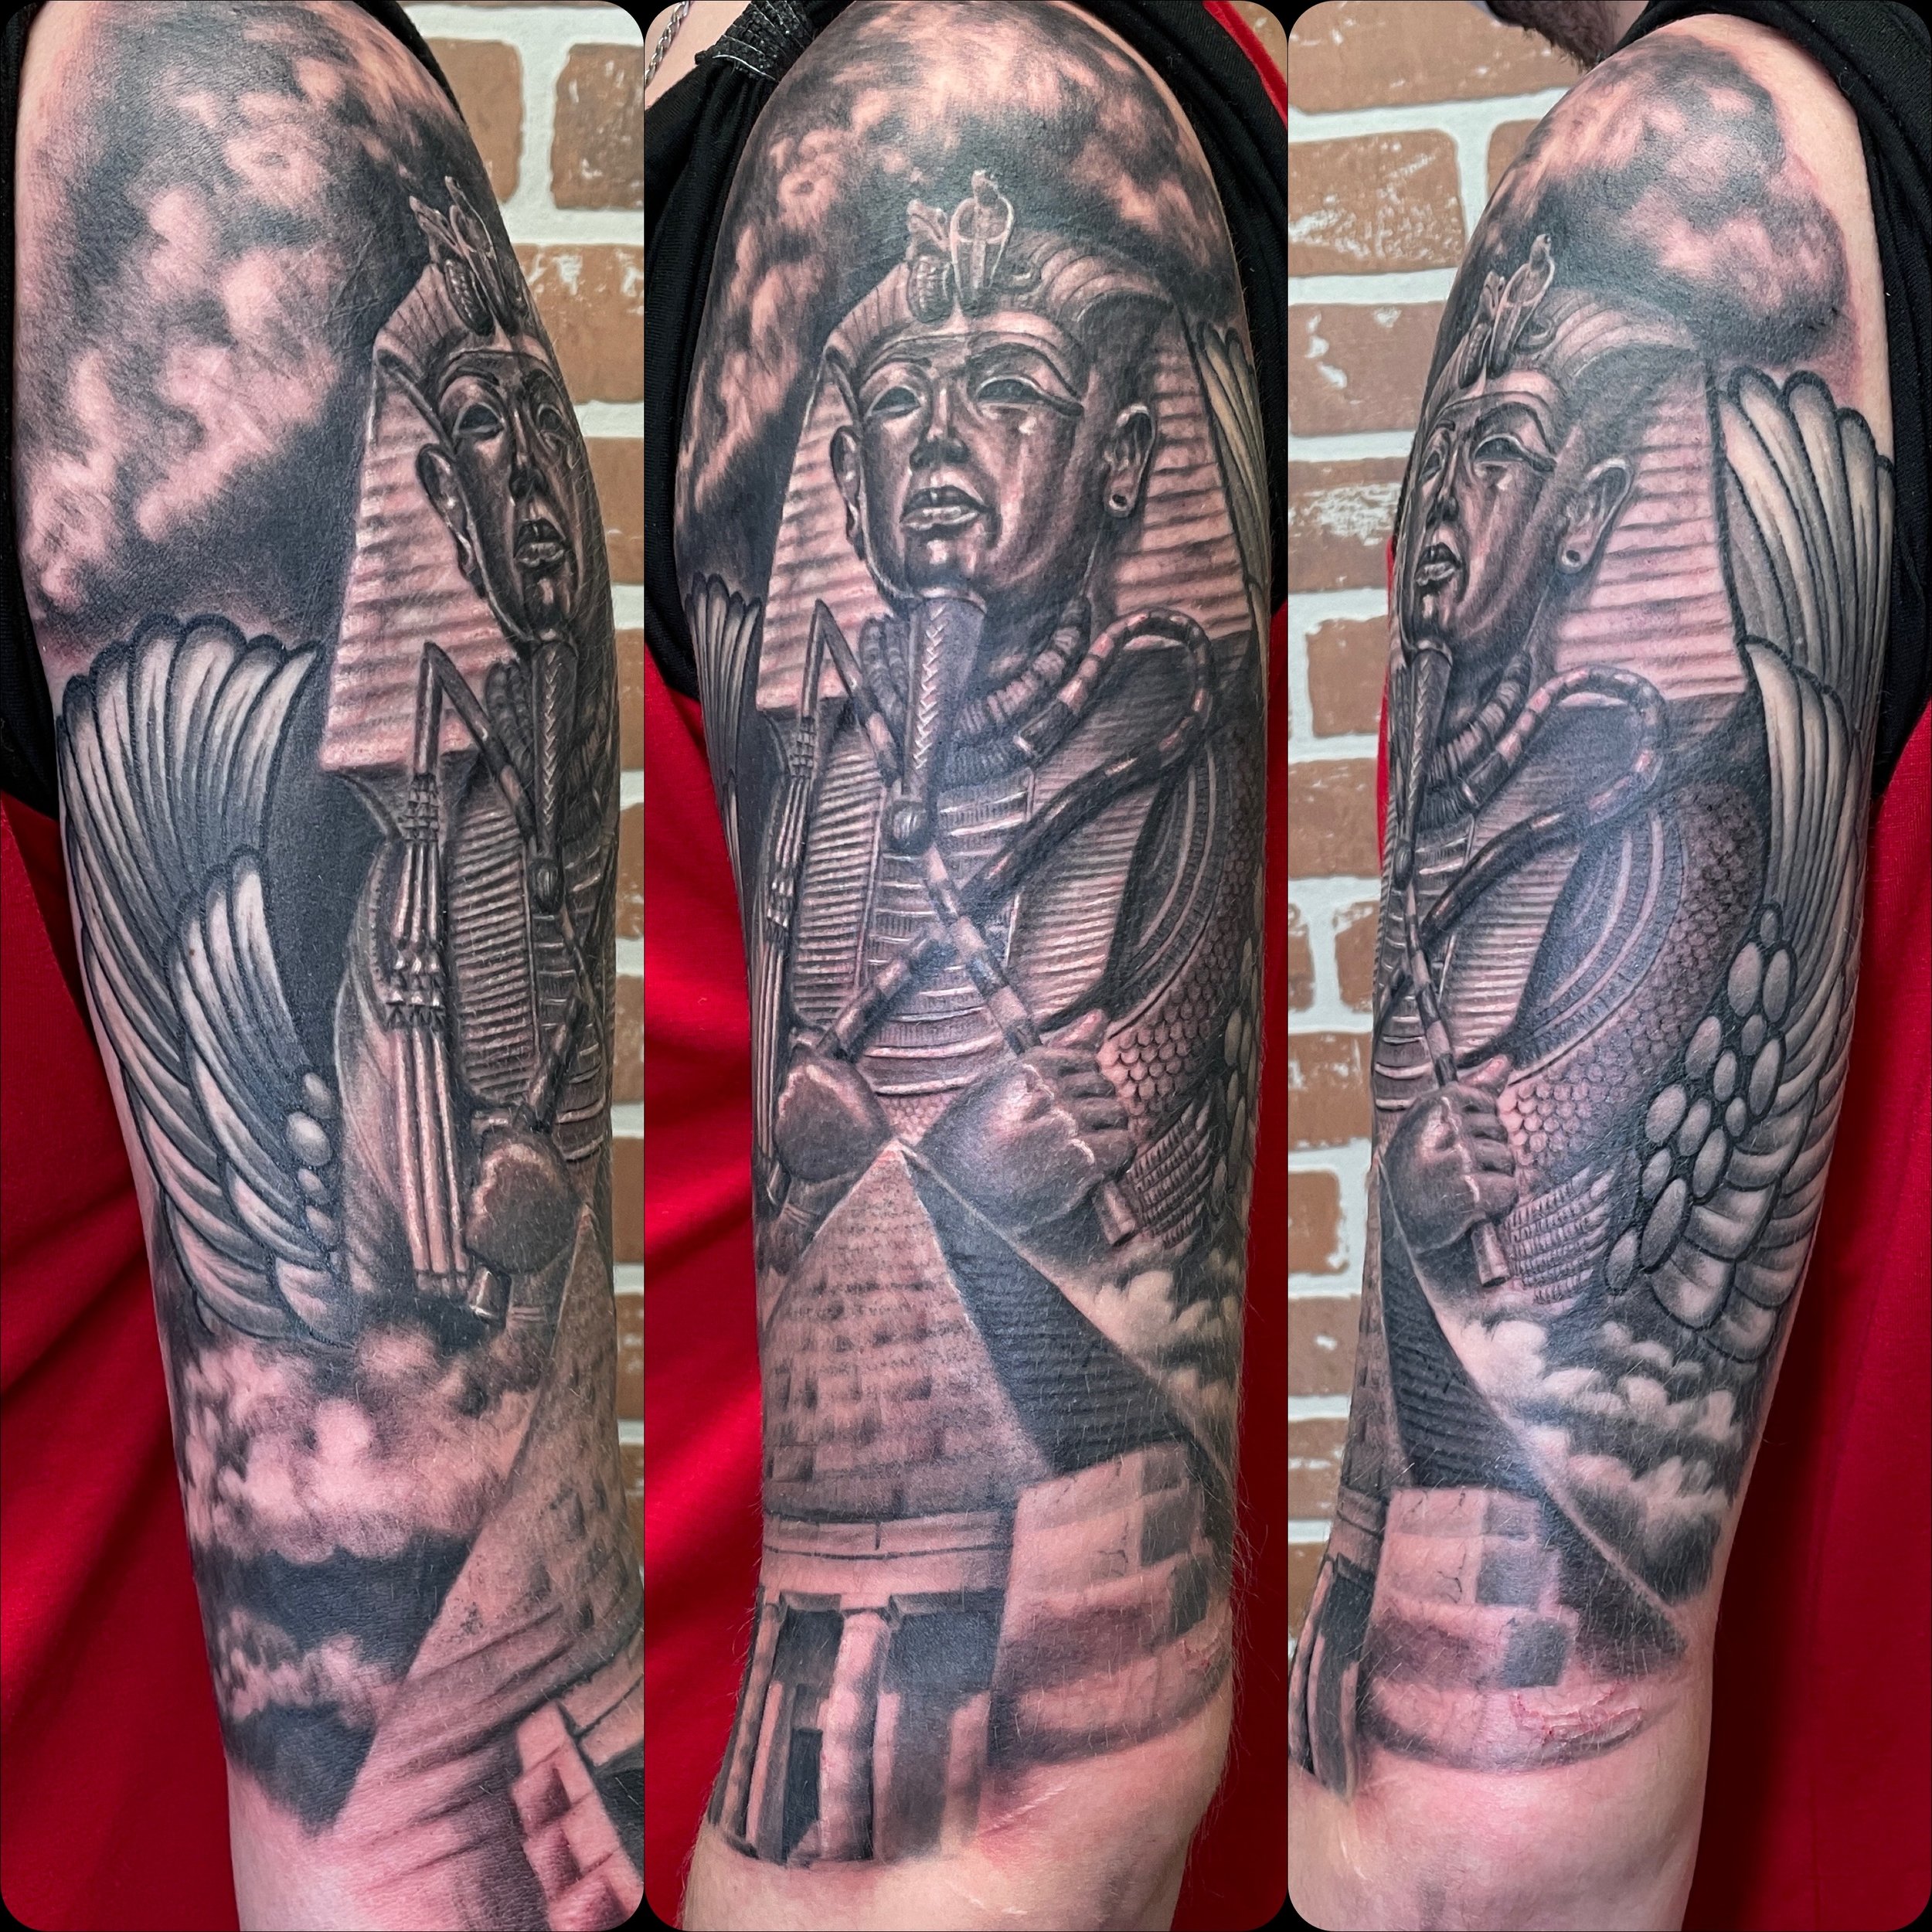 Shadows and sentiments in the Black and Grey tattoo of Francesco Bianco   Tattoo Life